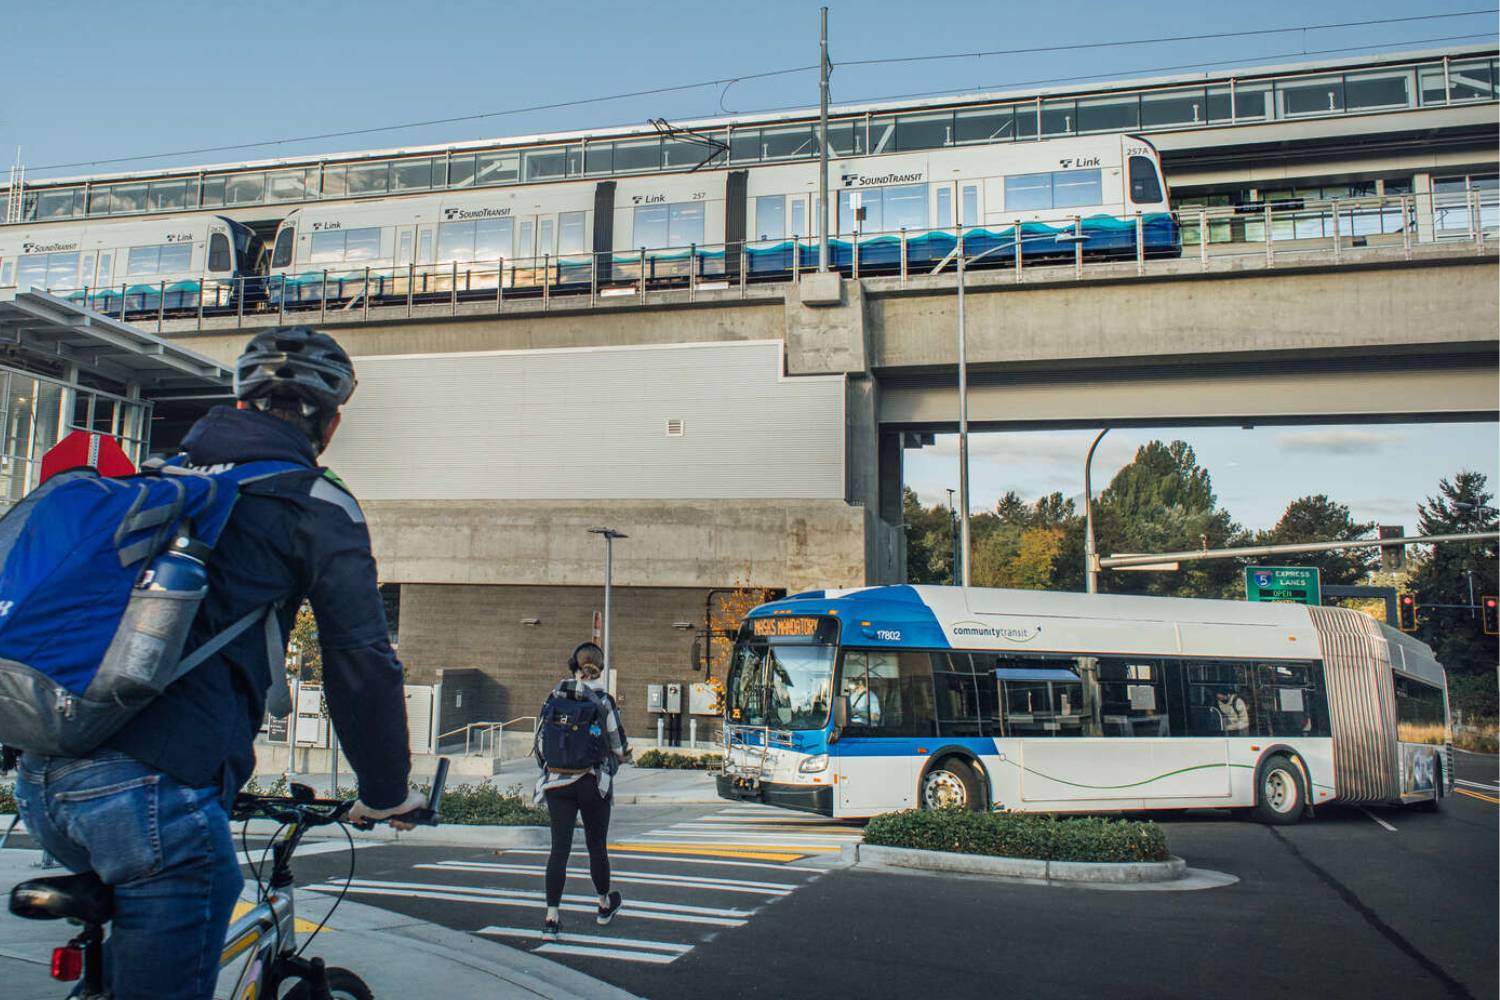 A picture of activity at Northgate Station includes a man on a bike, a woman in the crosswalk, a Community Transit bus and a Link light rail train on tracks above.